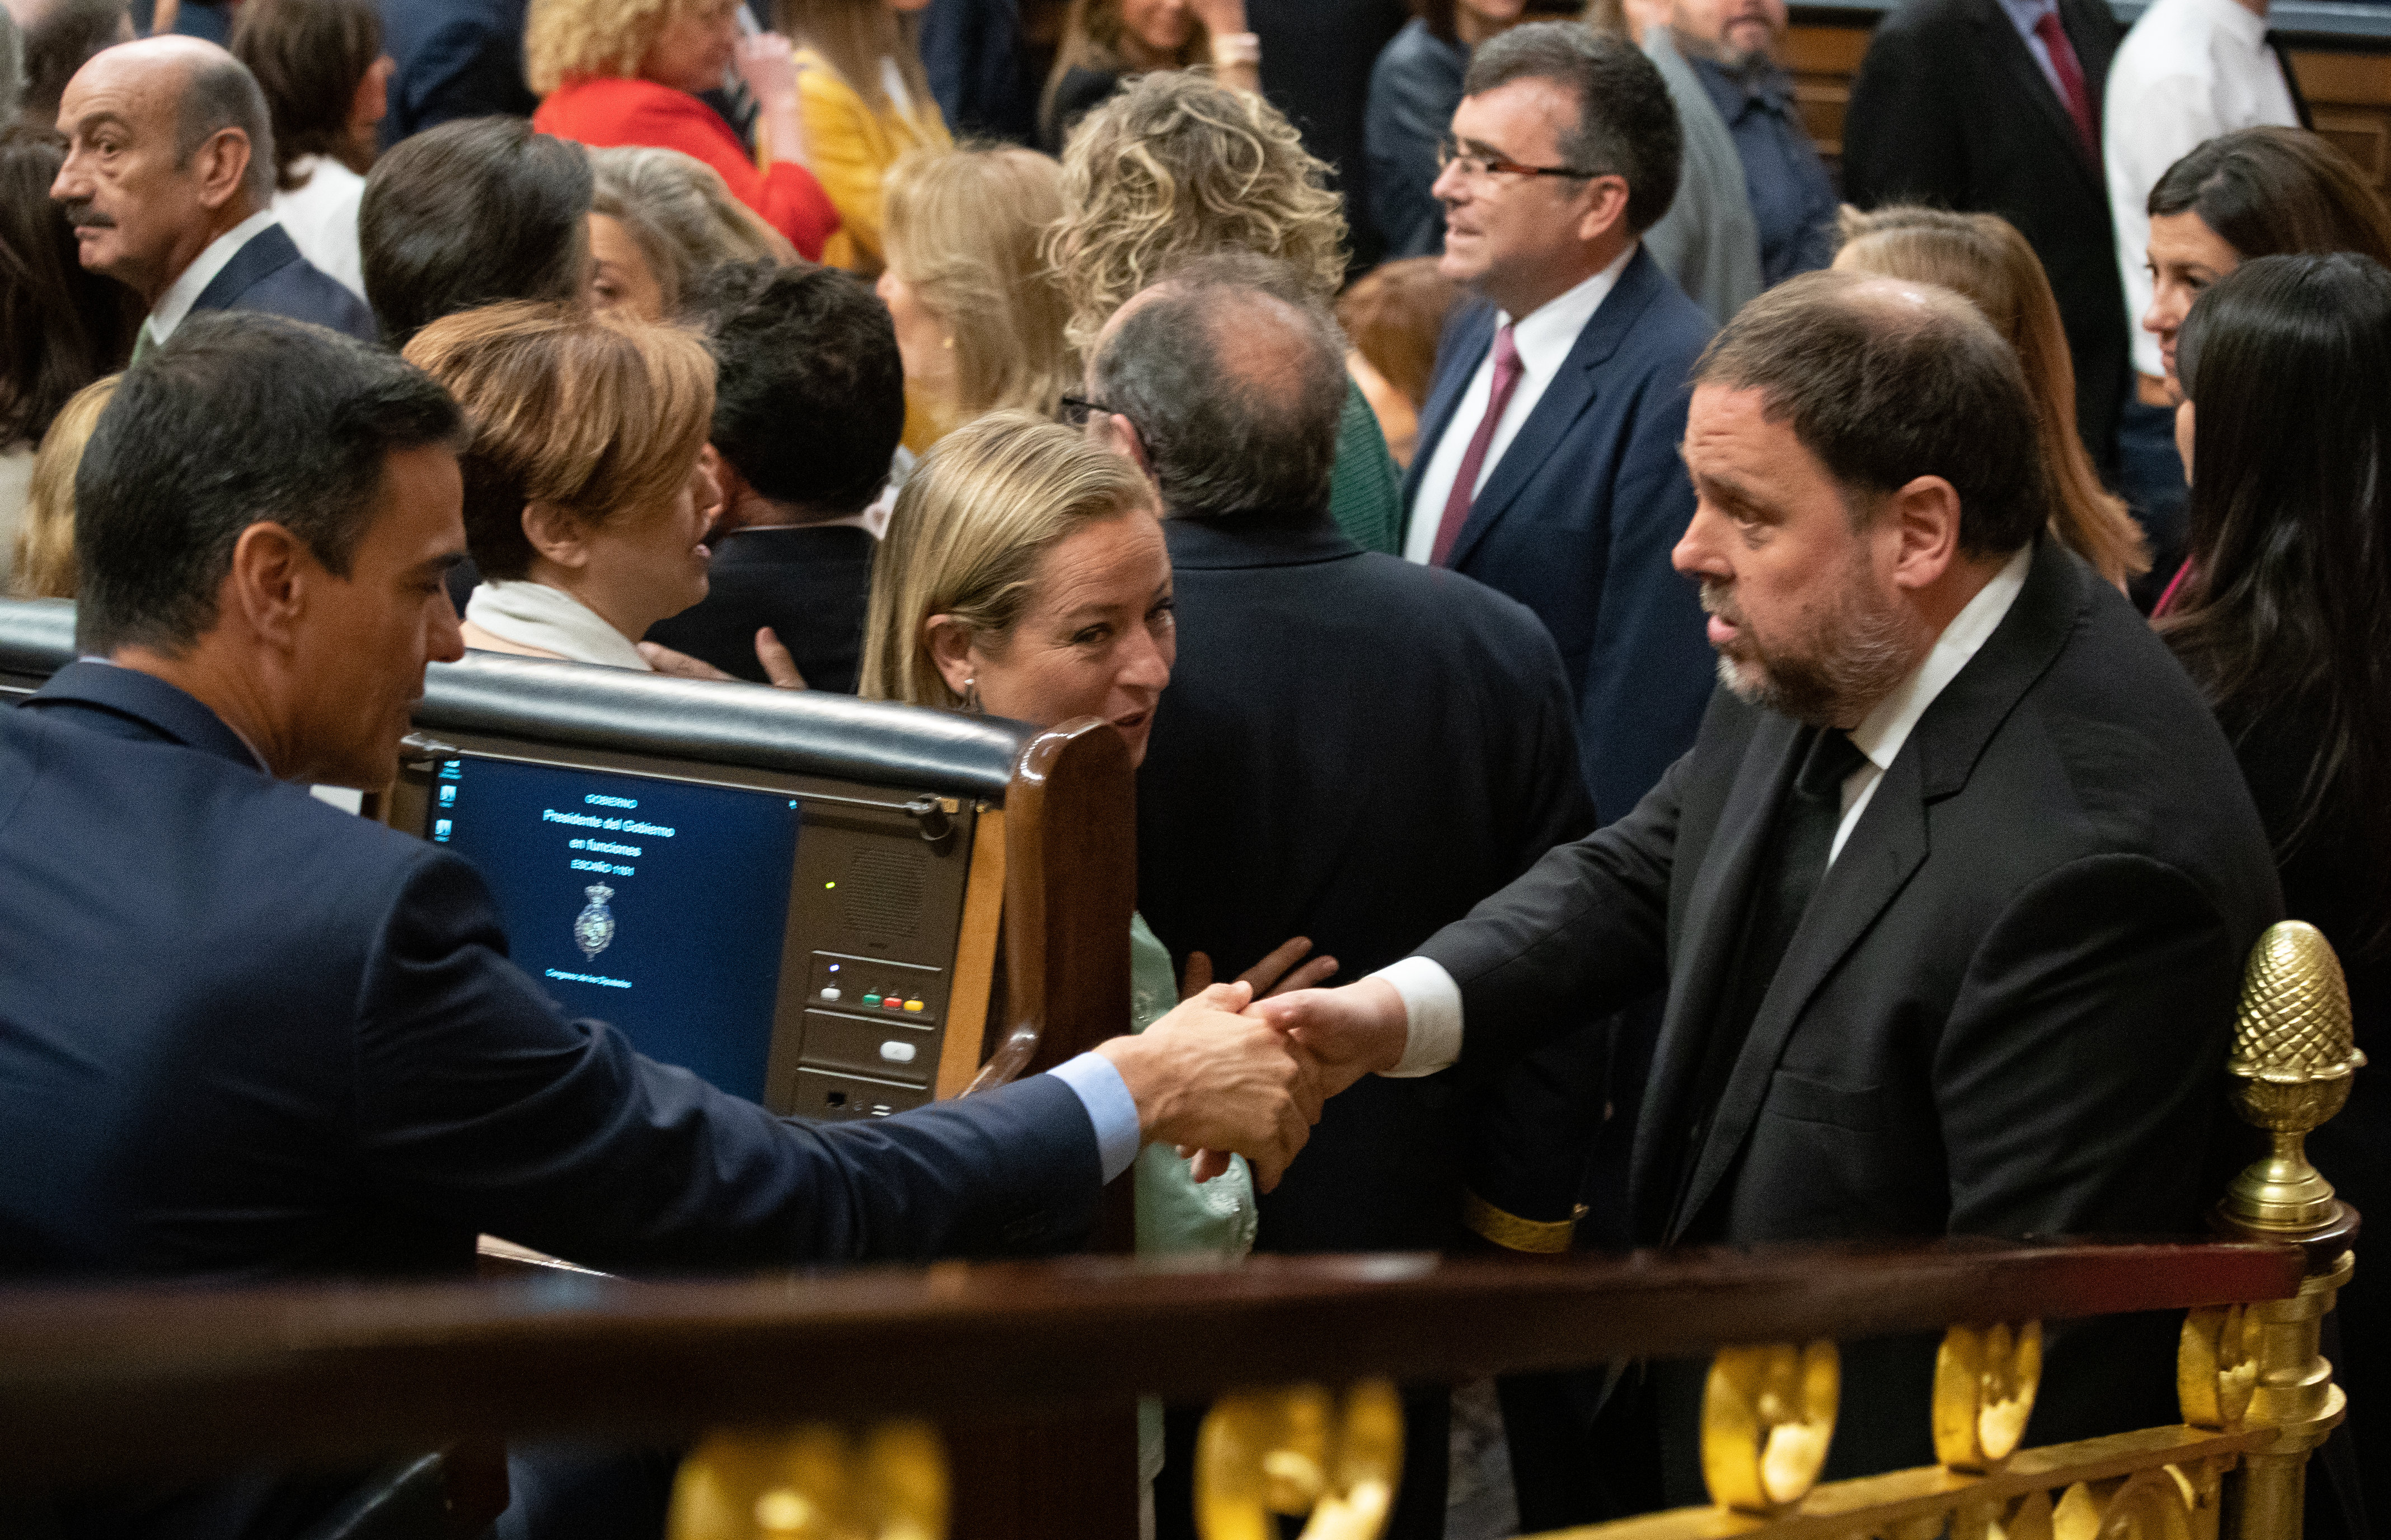 Jailed Catalan leader Oriol Junqueras and Spain's acting president Pedro Sánchez shake hands in the Spanish congress (by ACN)